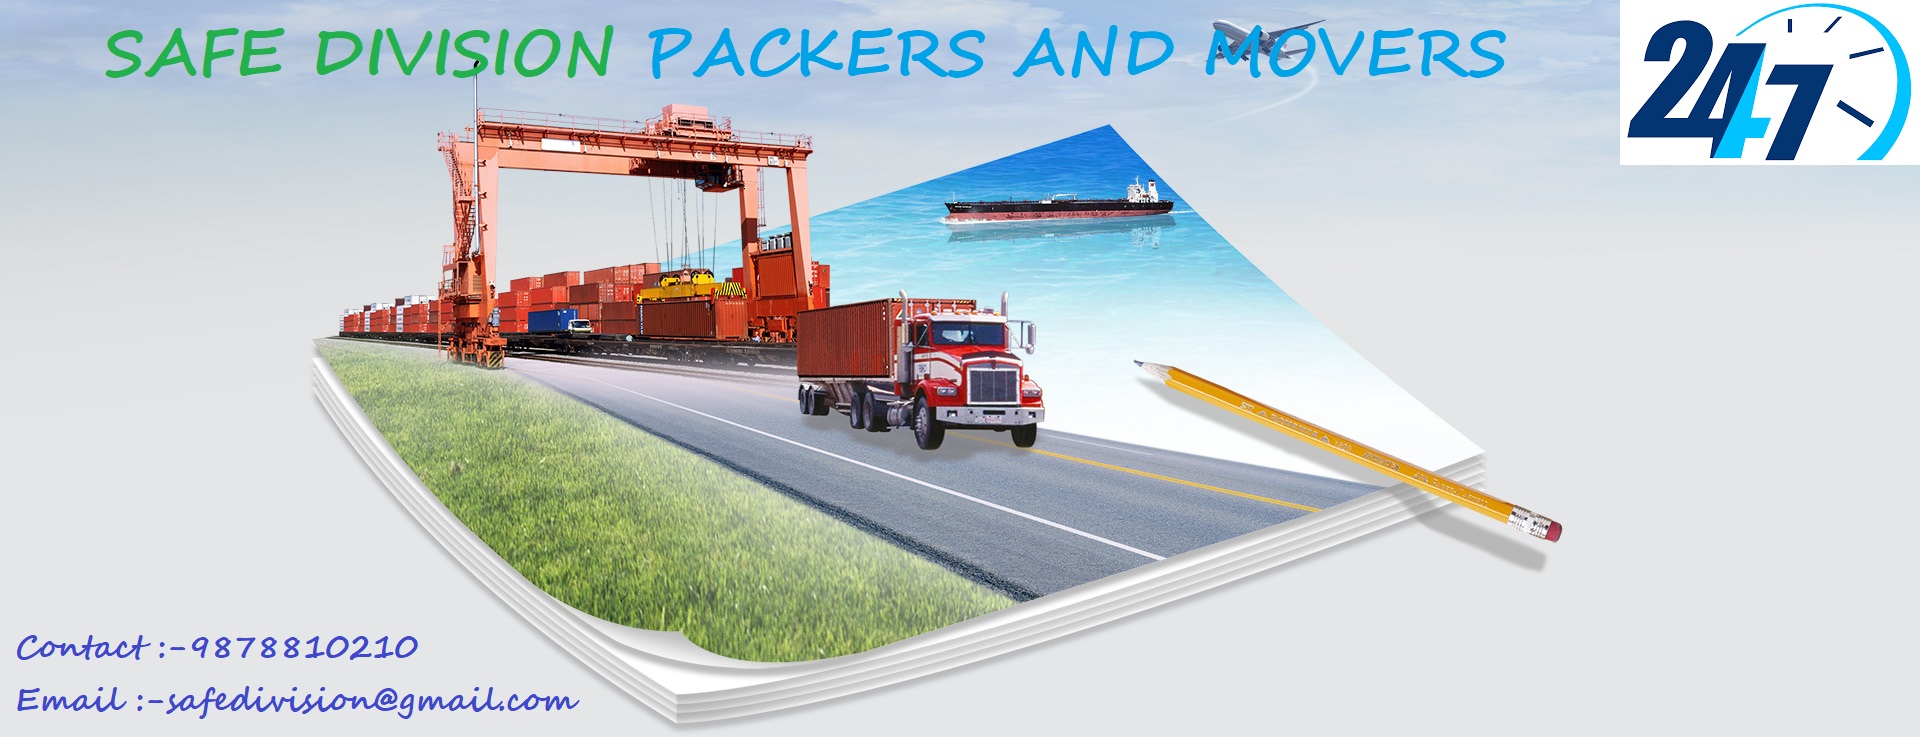 Safe division packers and movers in